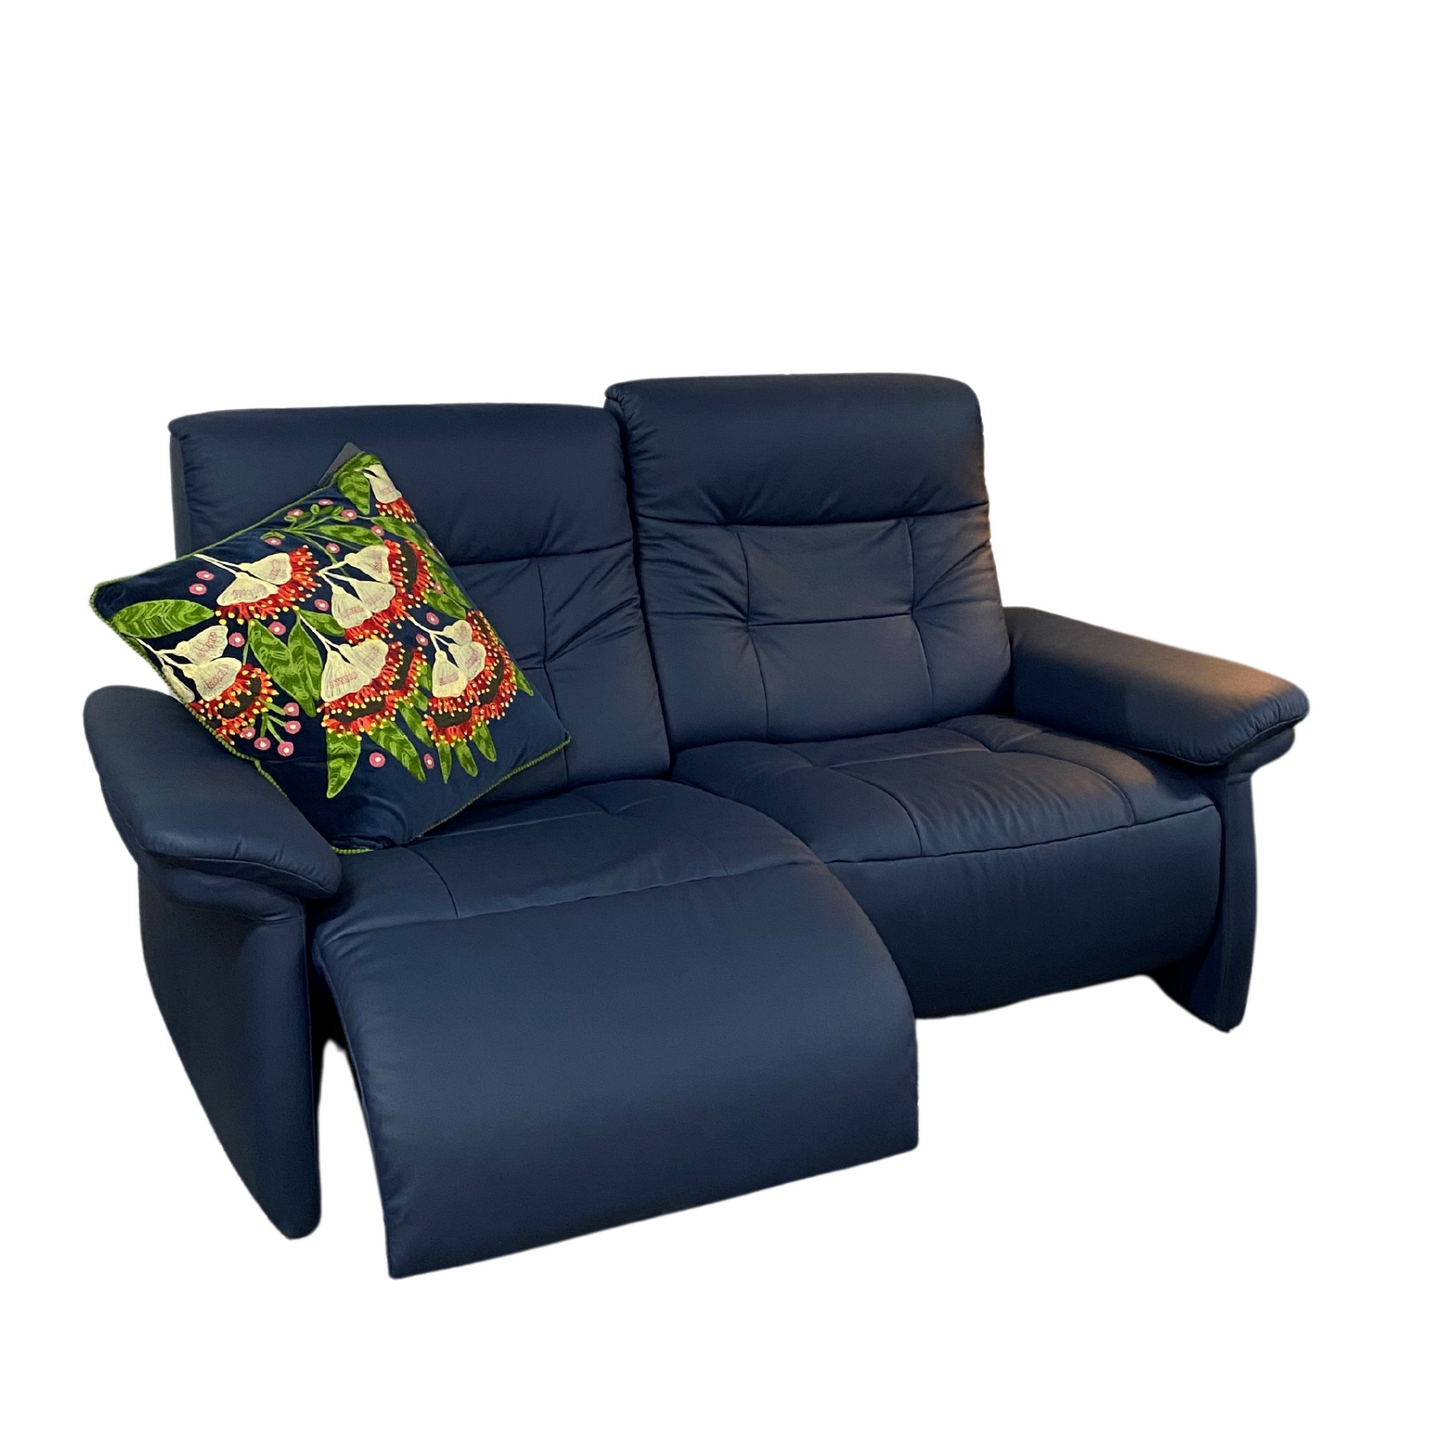 Mary 2 Seater Sofa by Stressless